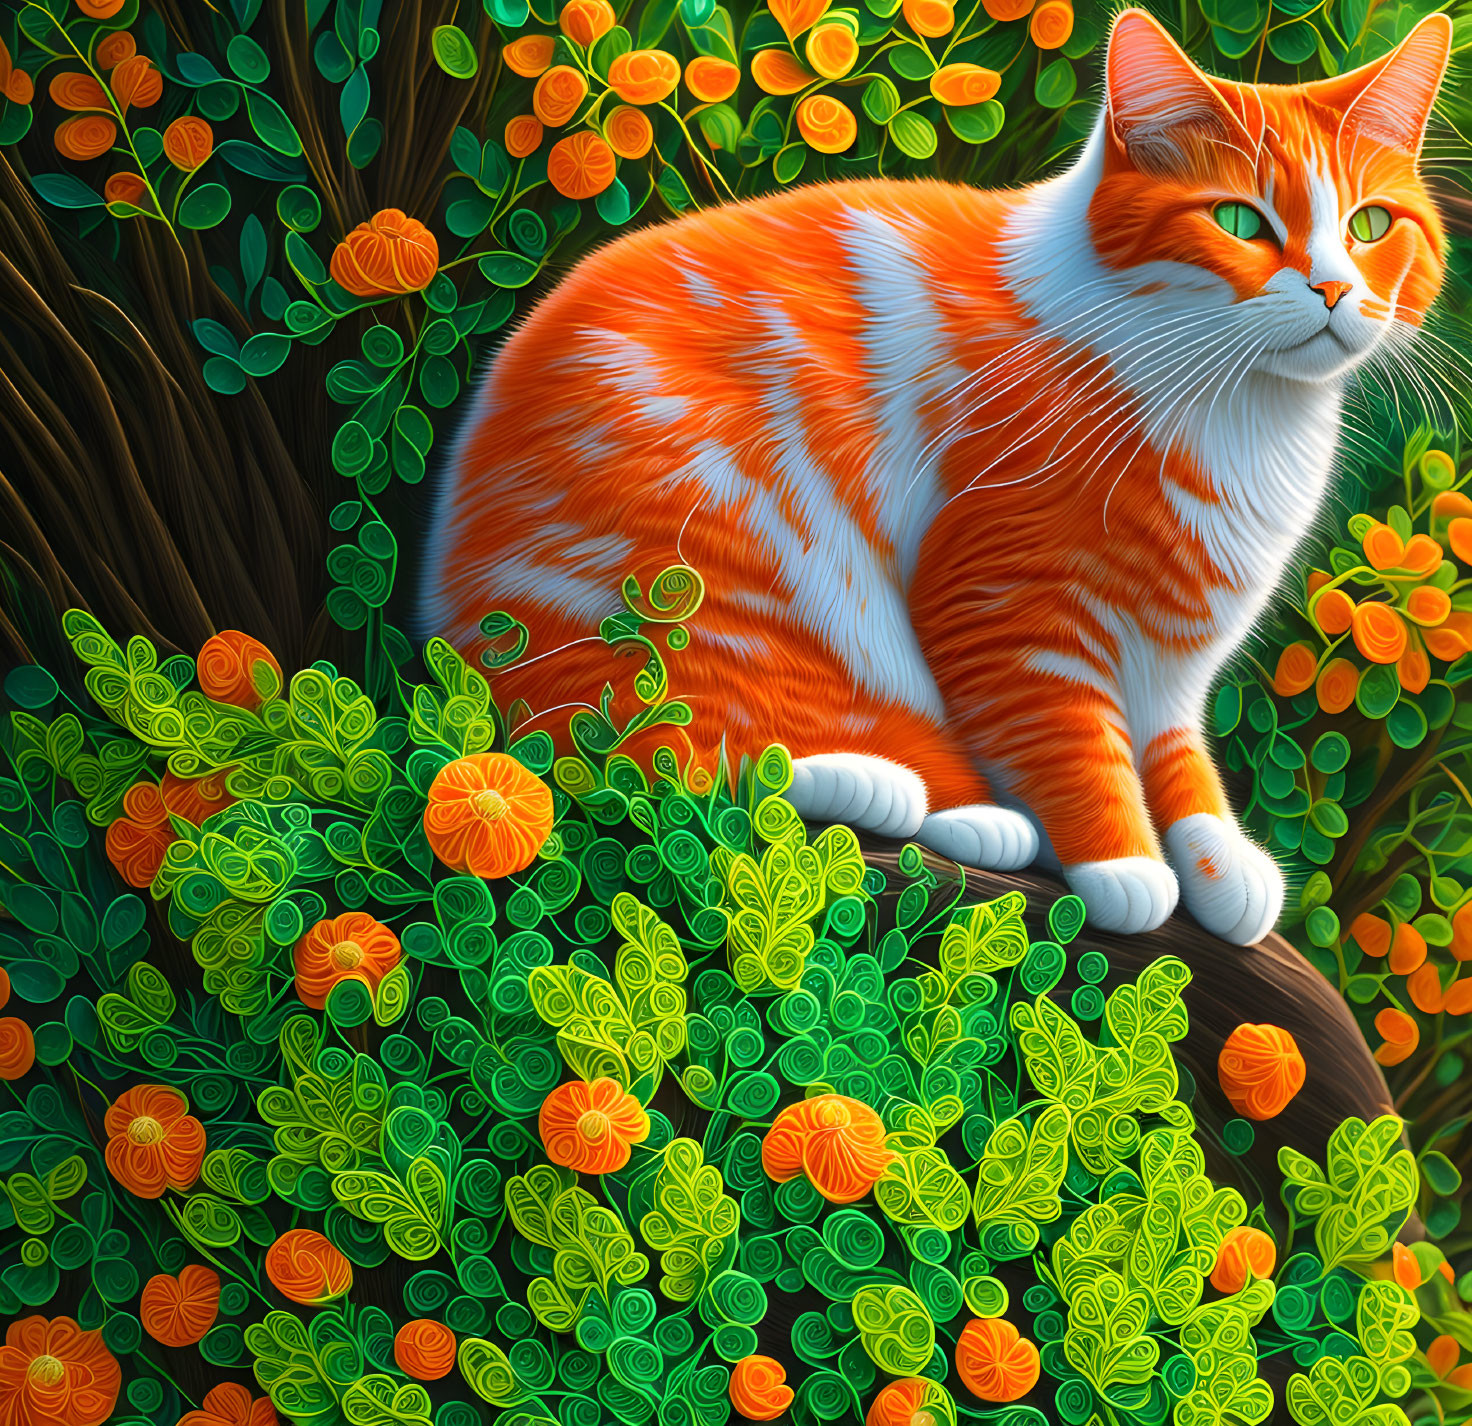 Colorful Cat Illustration Among Orange and Green Floral Patterns